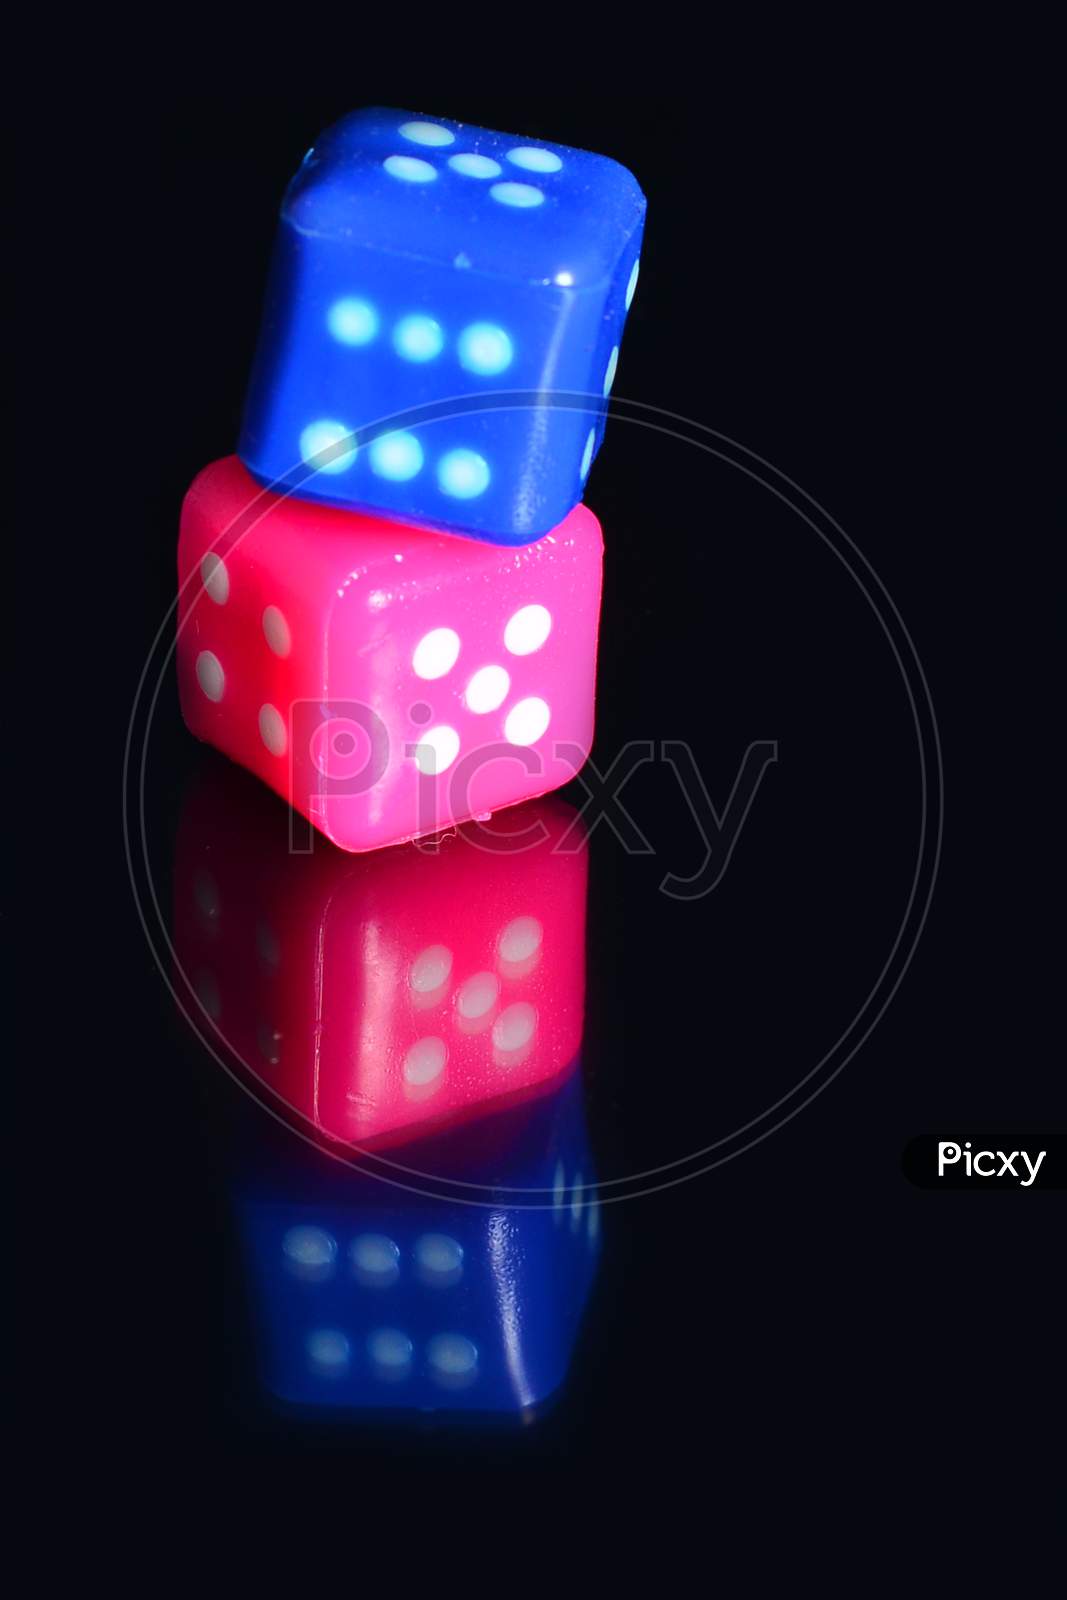 Multi Color Dice Placed On Top Of Each Other Over Reflecting Surface.